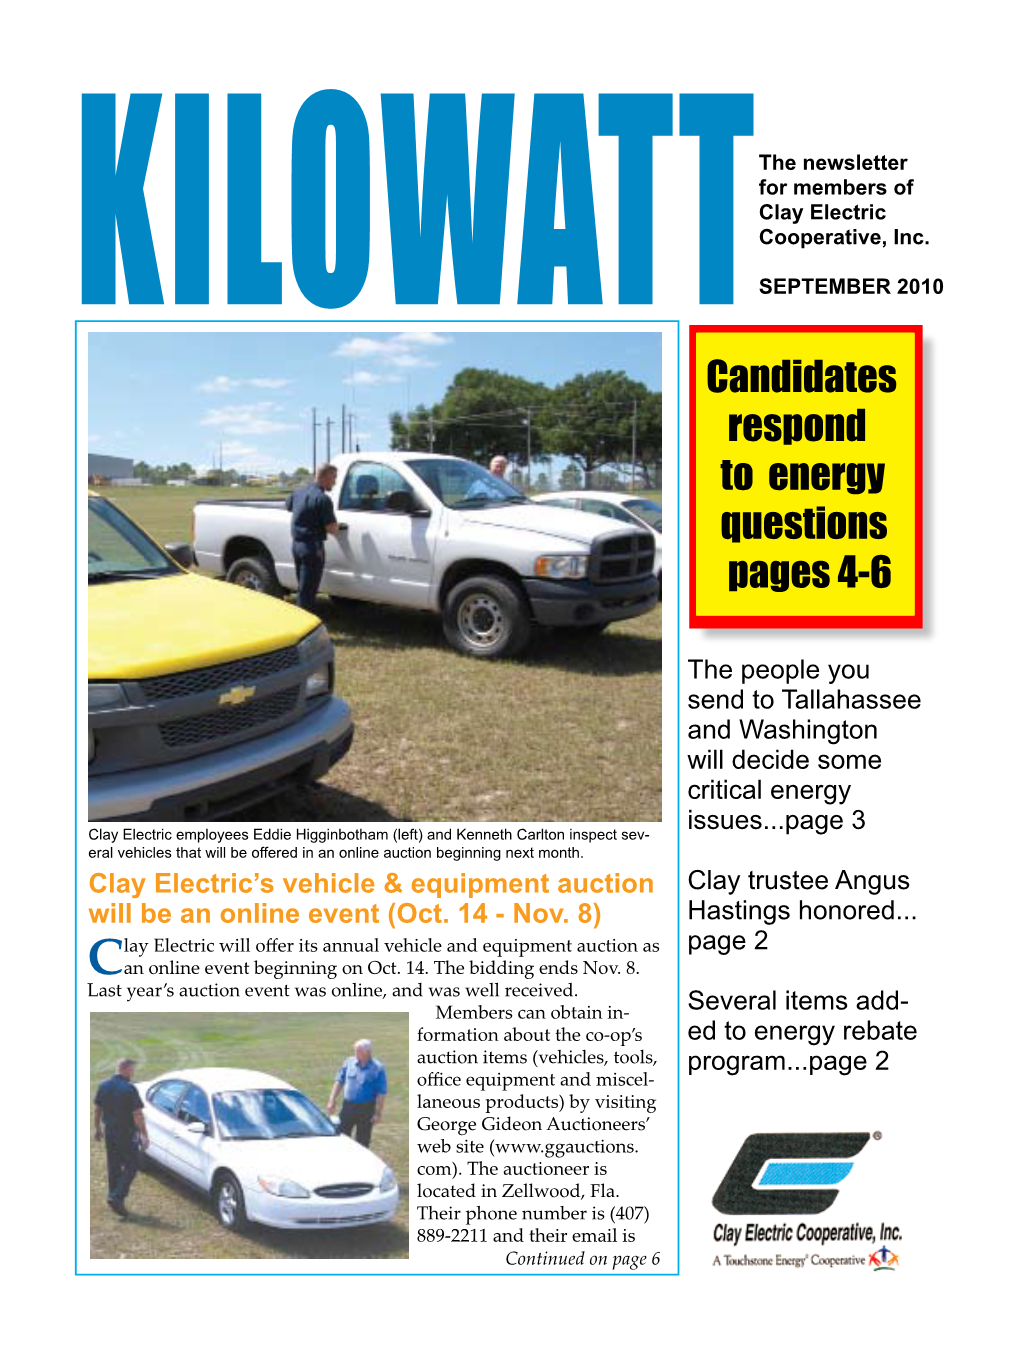 Candidates Respond to Energy Questions Pages 4-6